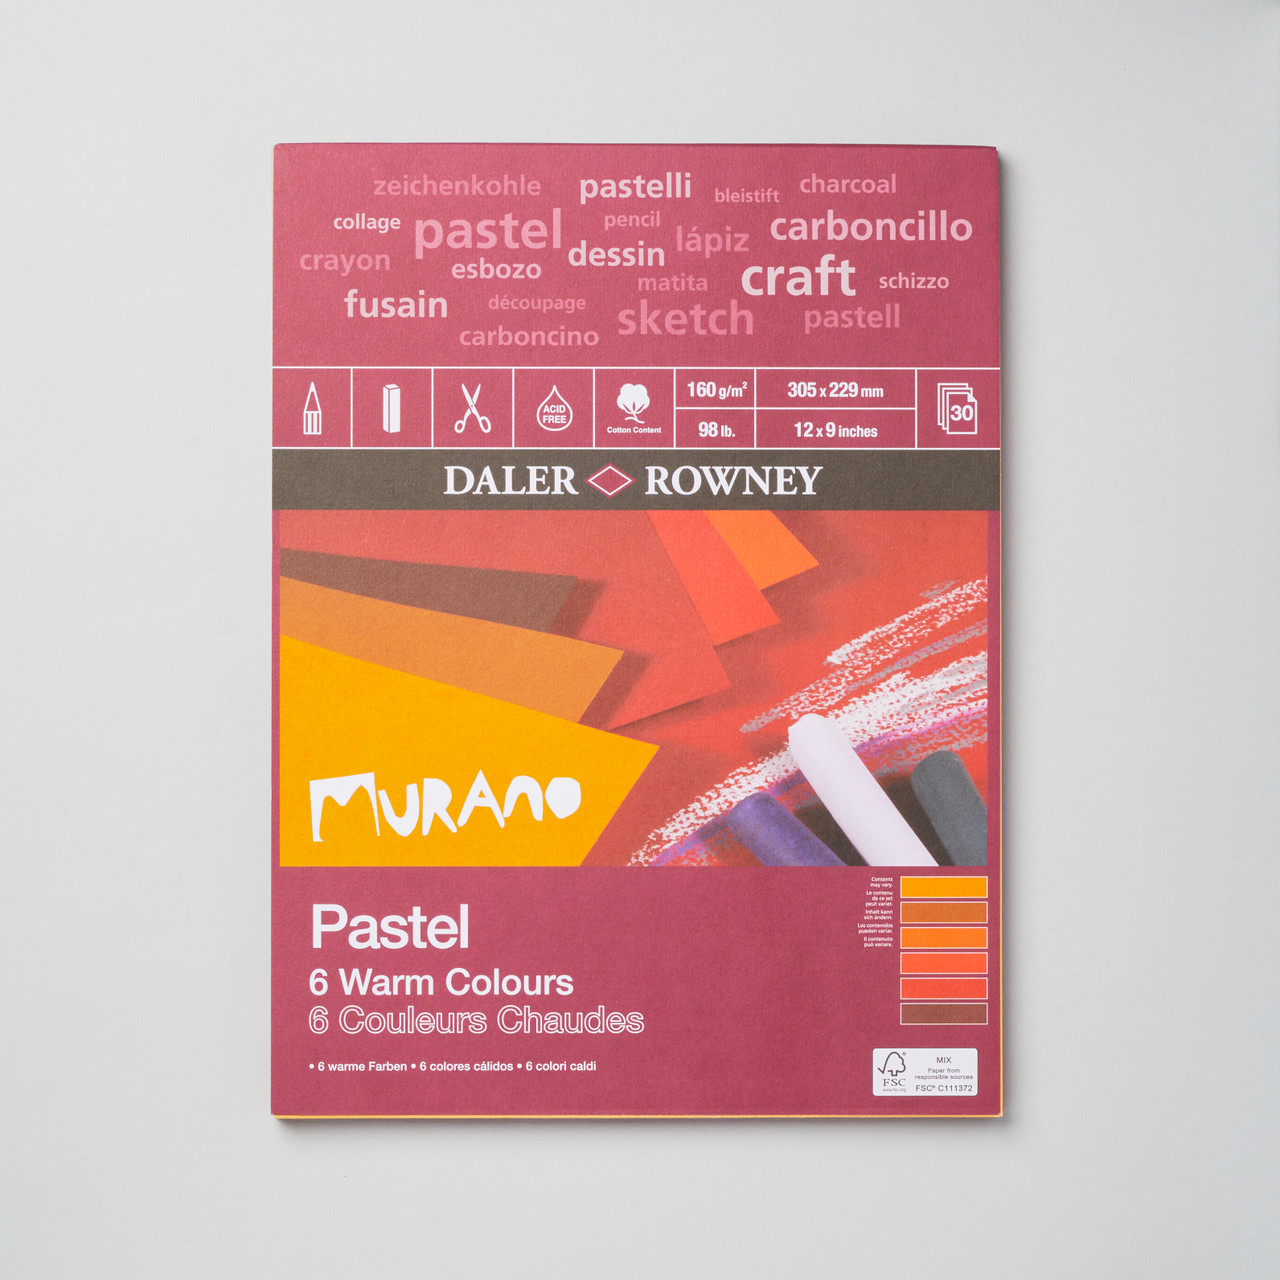 Daler Rowney Murano Fine Art Paper Pad 160gsm 30 Sheets Warm Colours 12 x 9 inches